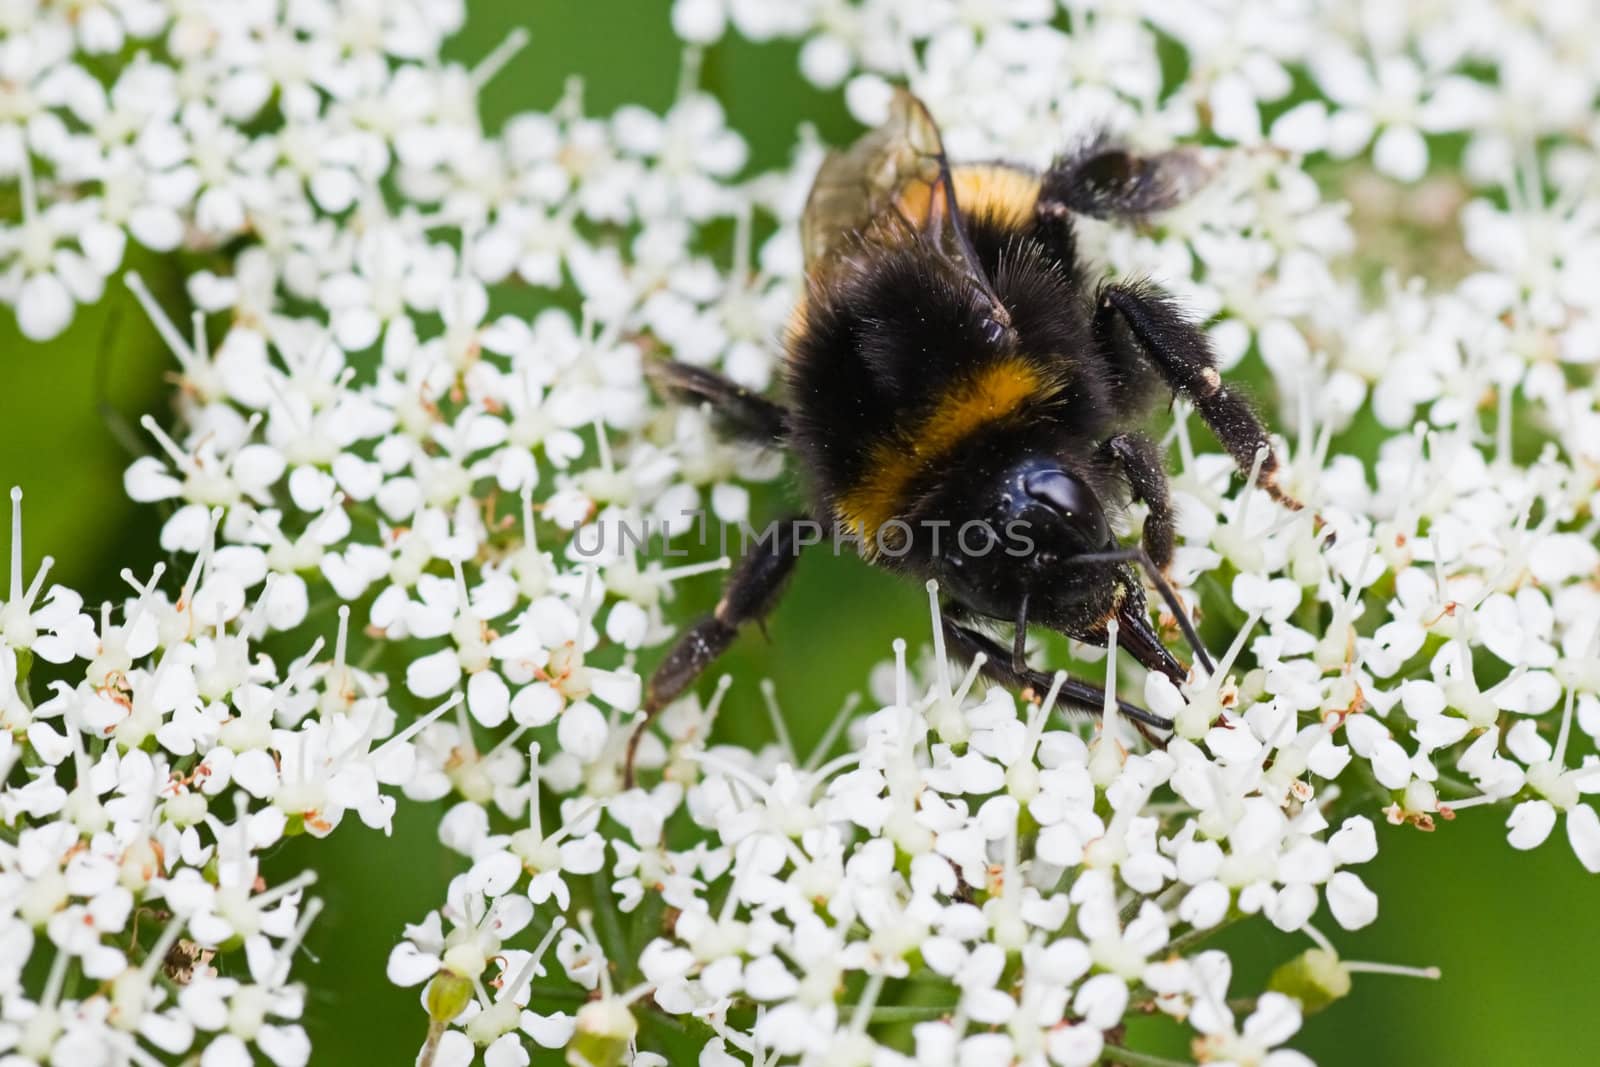 Little Bumble bee on flowers in summer busy gathering nectar